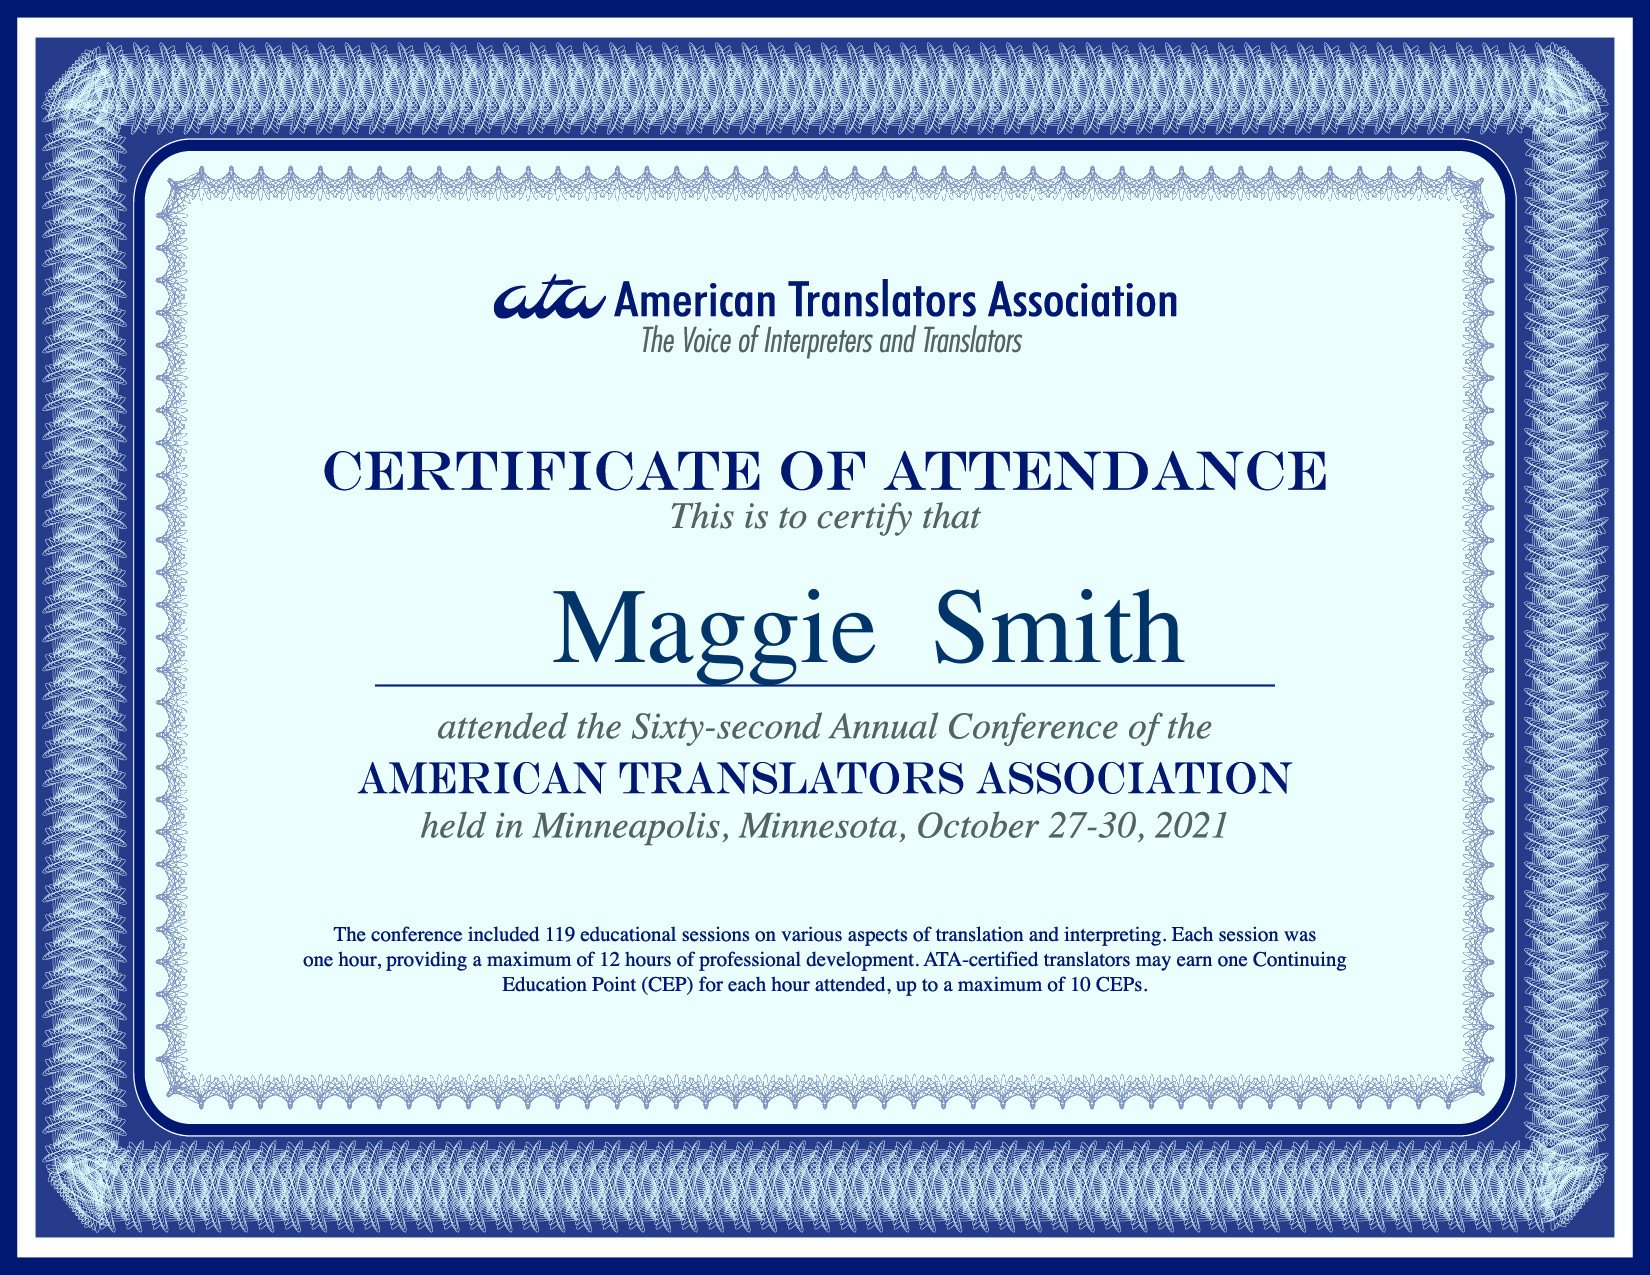 ATA62 Conference Certificate_Maggie Smith.jpeg